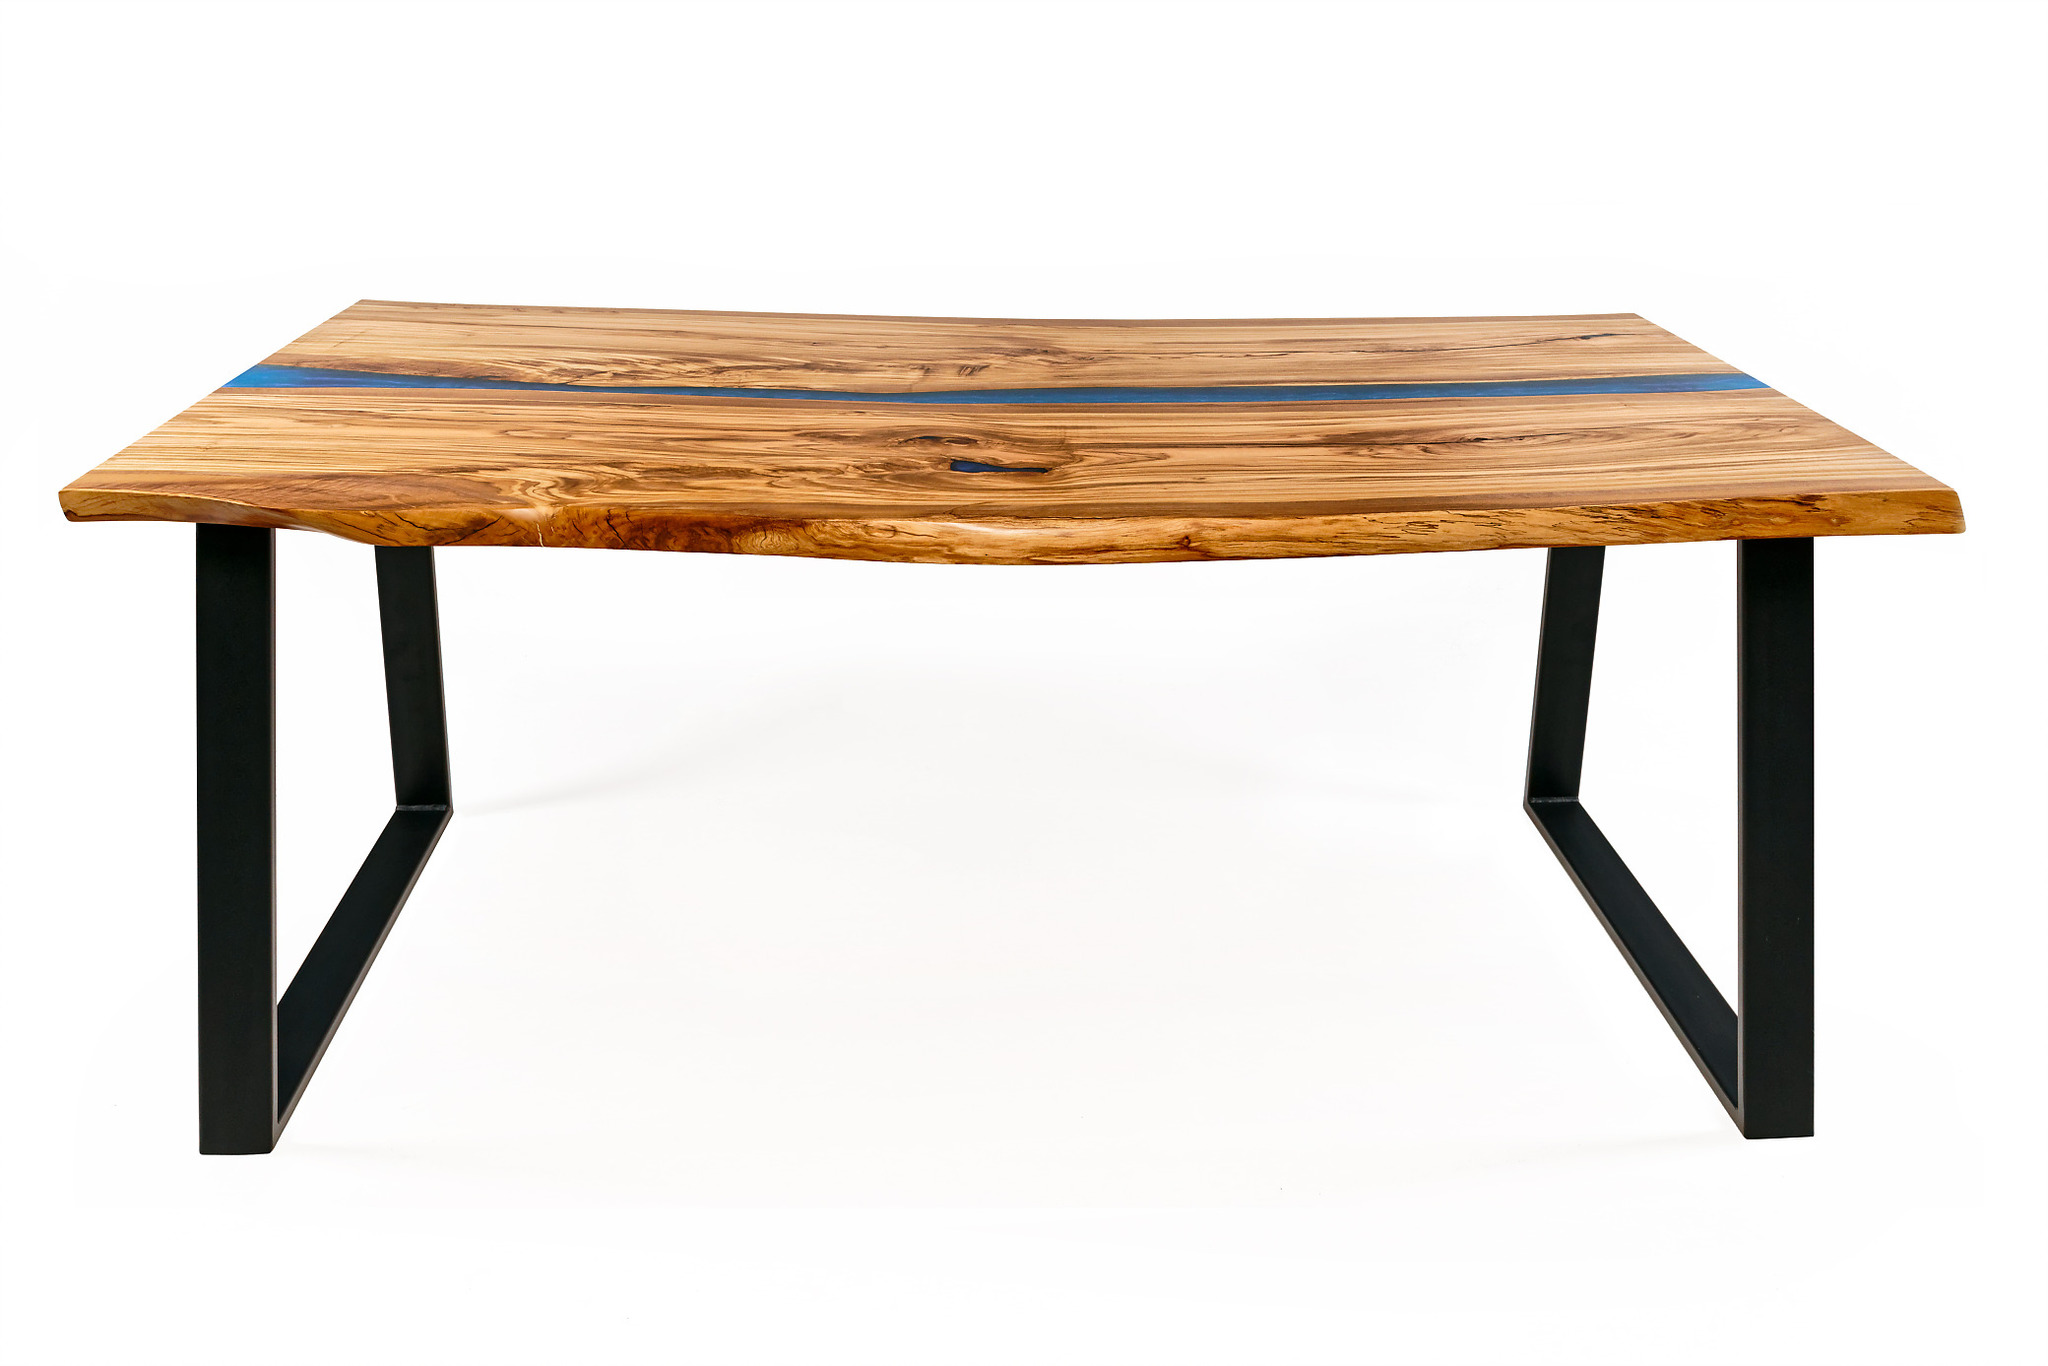 Venilia – olive wood table with blue epoxy resin